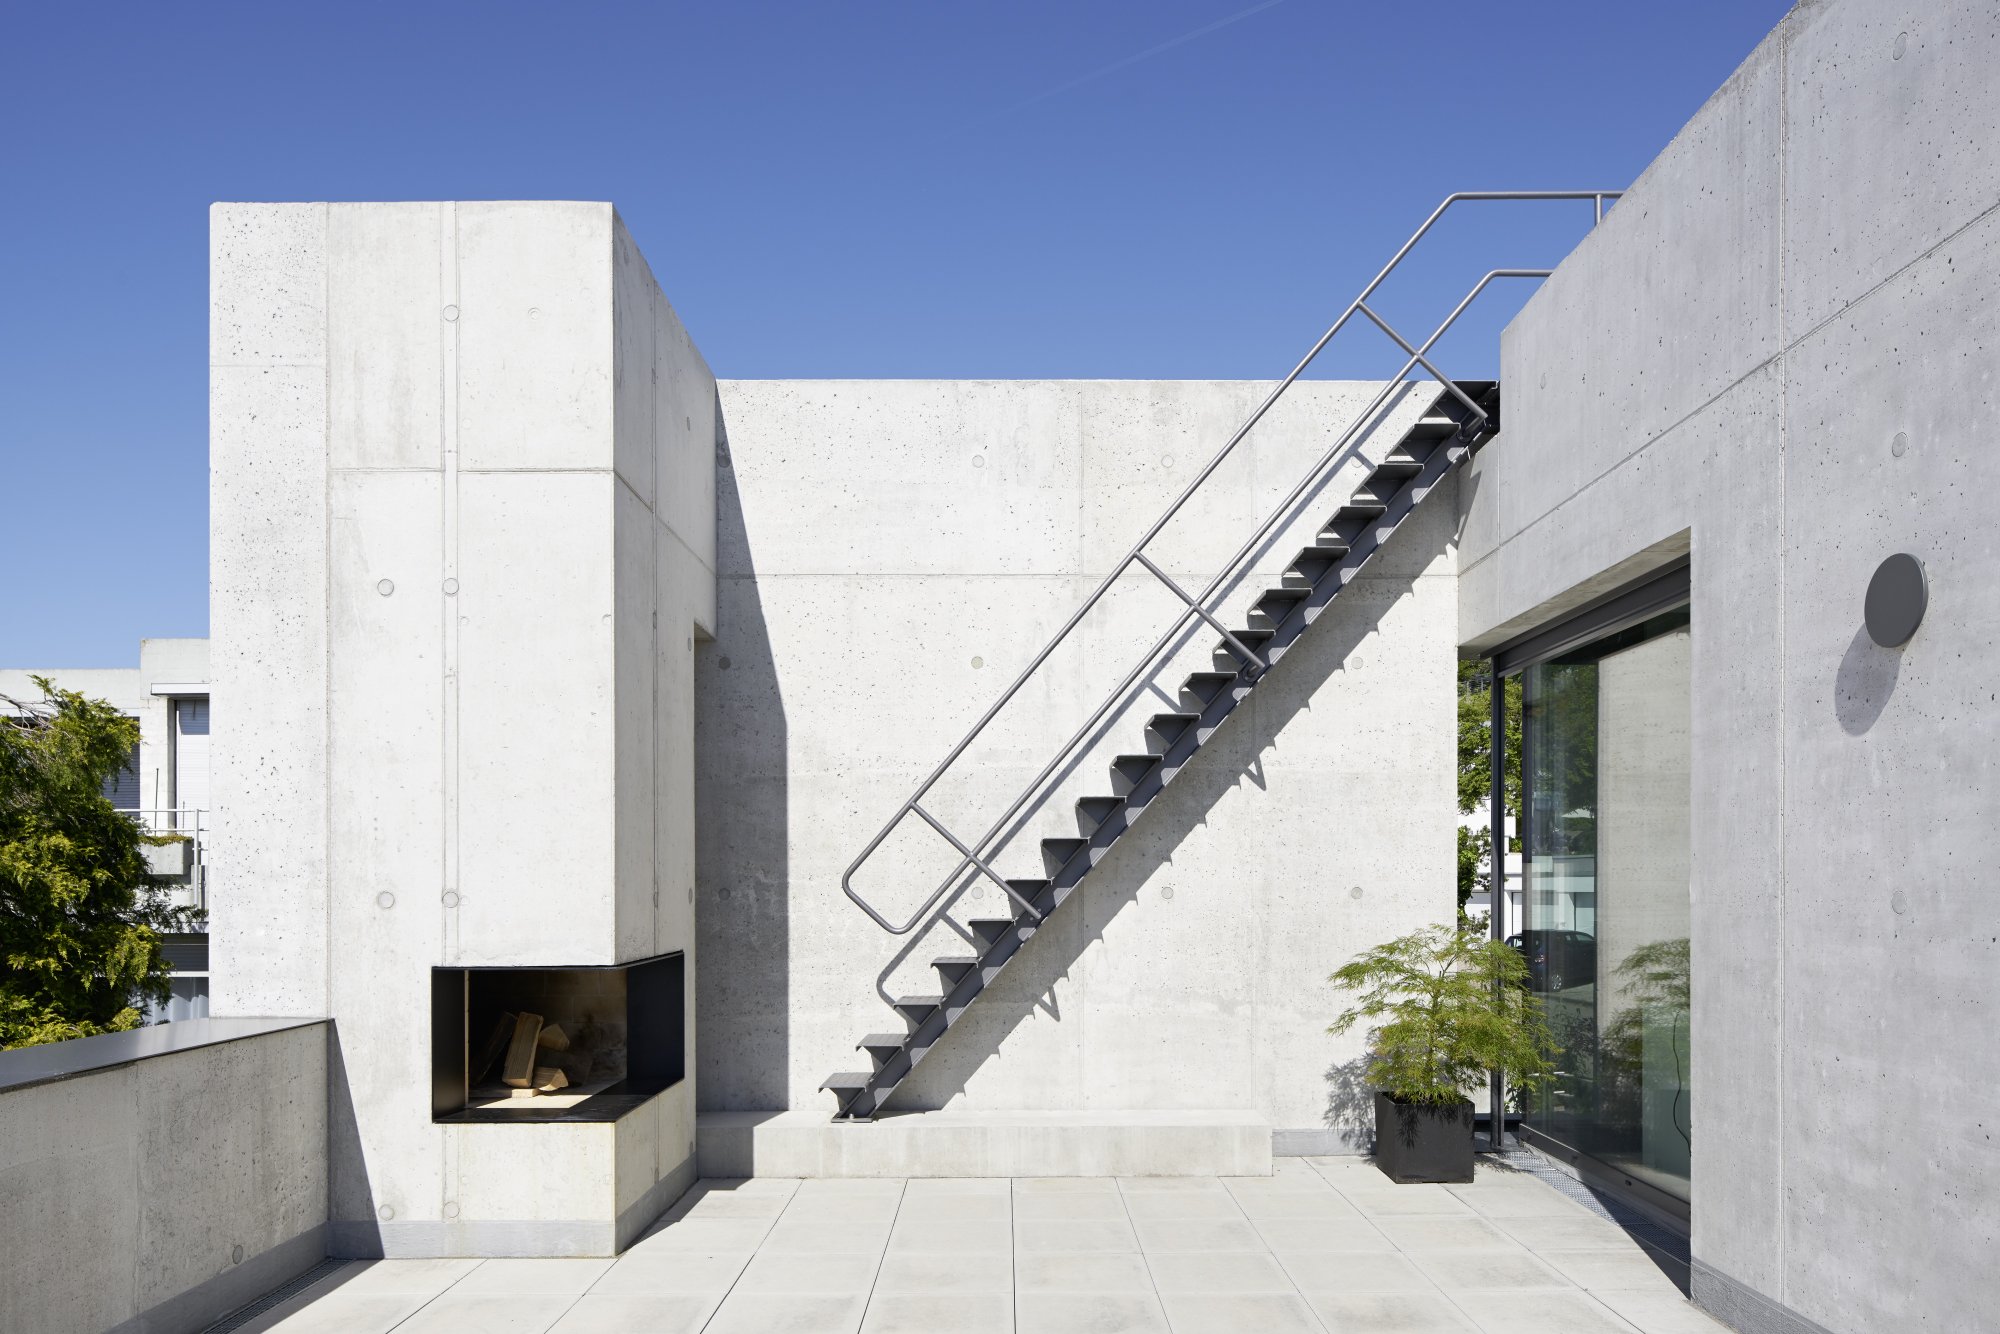 A cubic-formed concrete building with an staircase